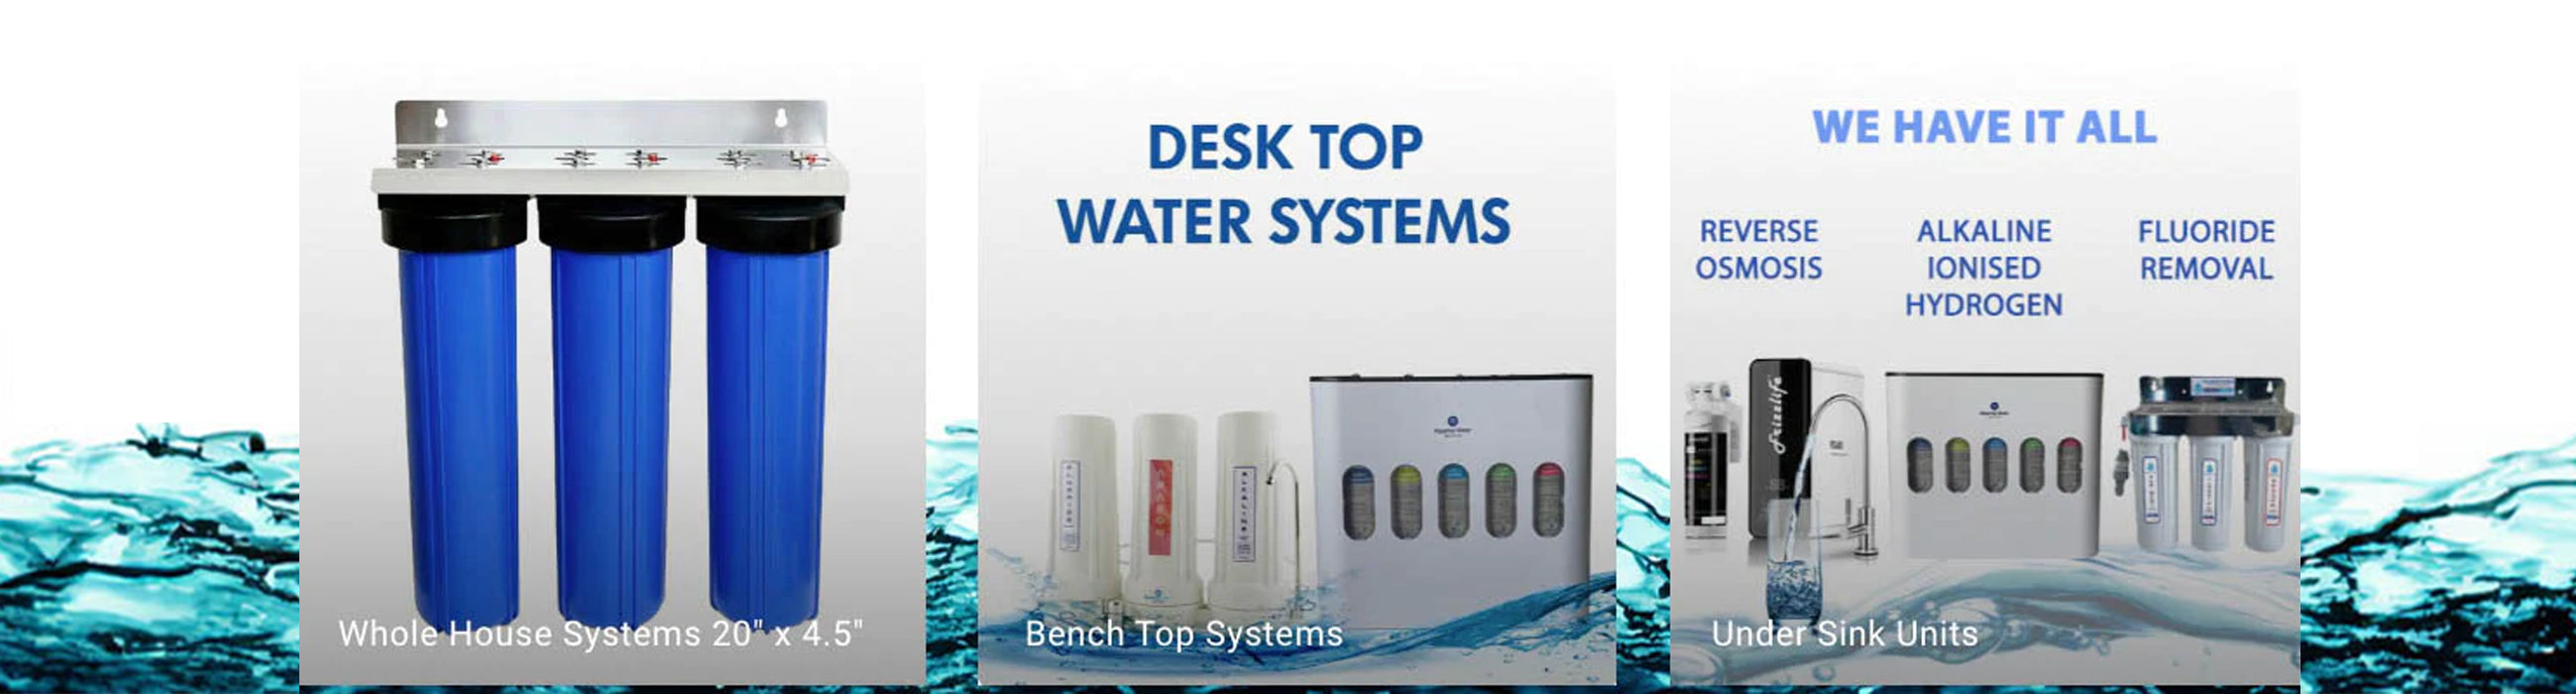 Bench Top Systems